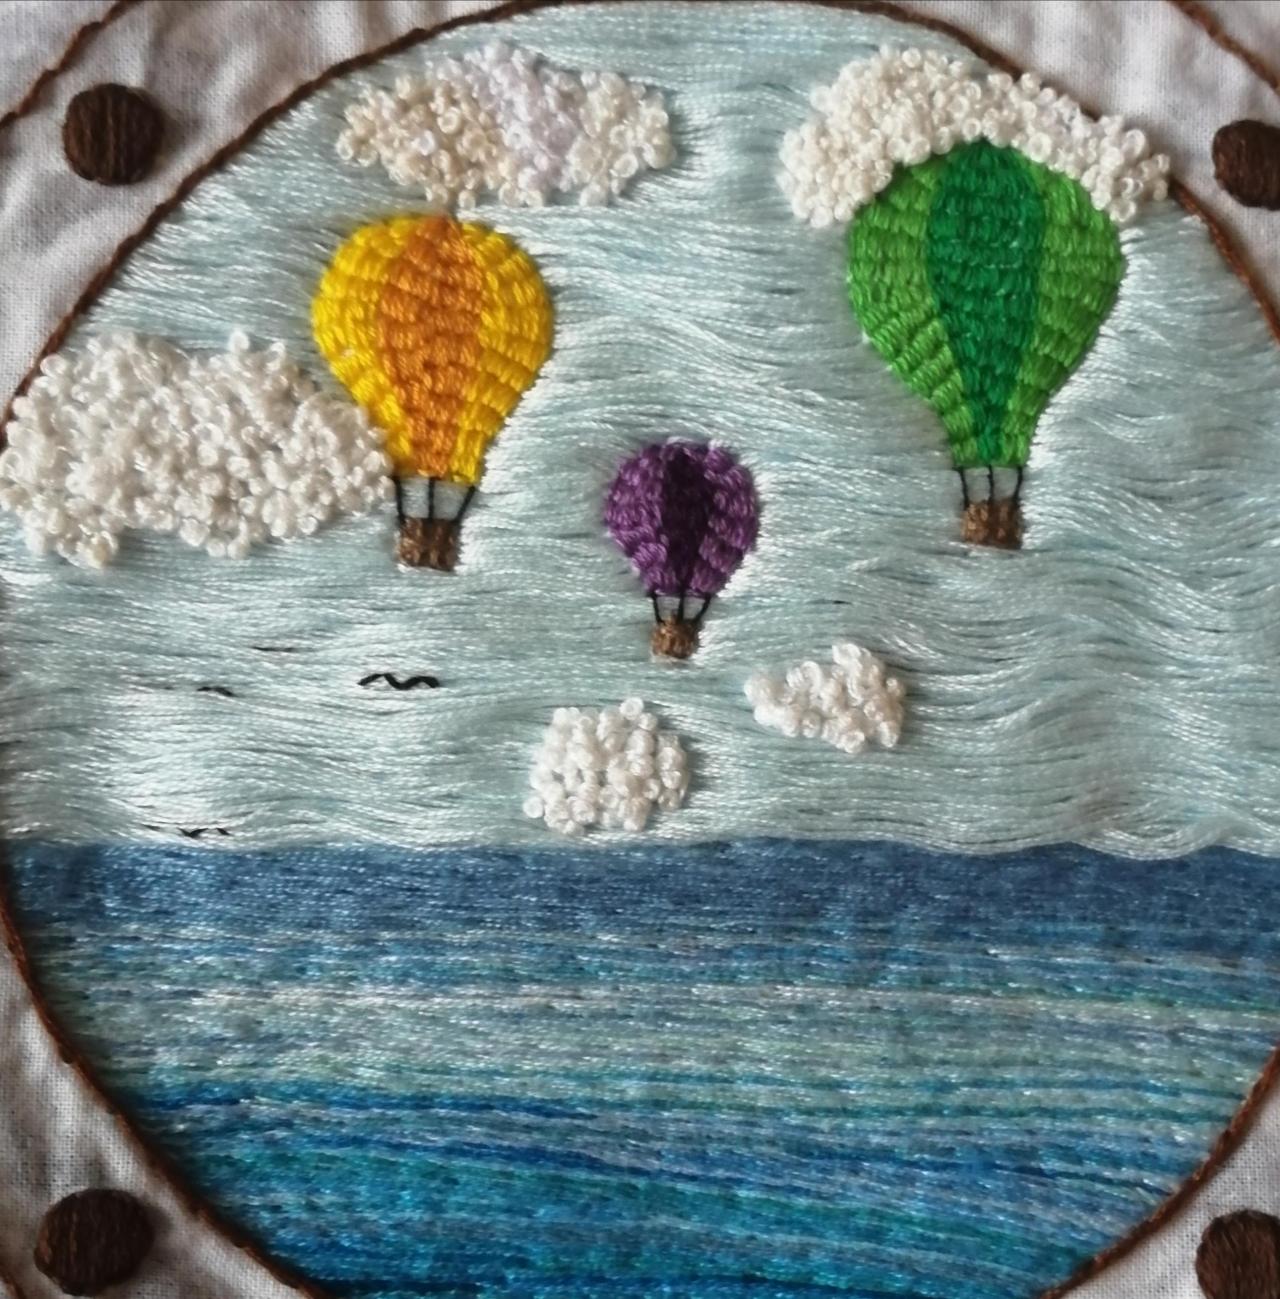 My first original piece (and second embroidery attempt in general) - pretty happy with how it turned out :) what do you think? by  cpandax #embroidery#needlecraft#needlework#crafts#embroidery pattern#creative#art#fabric crafts